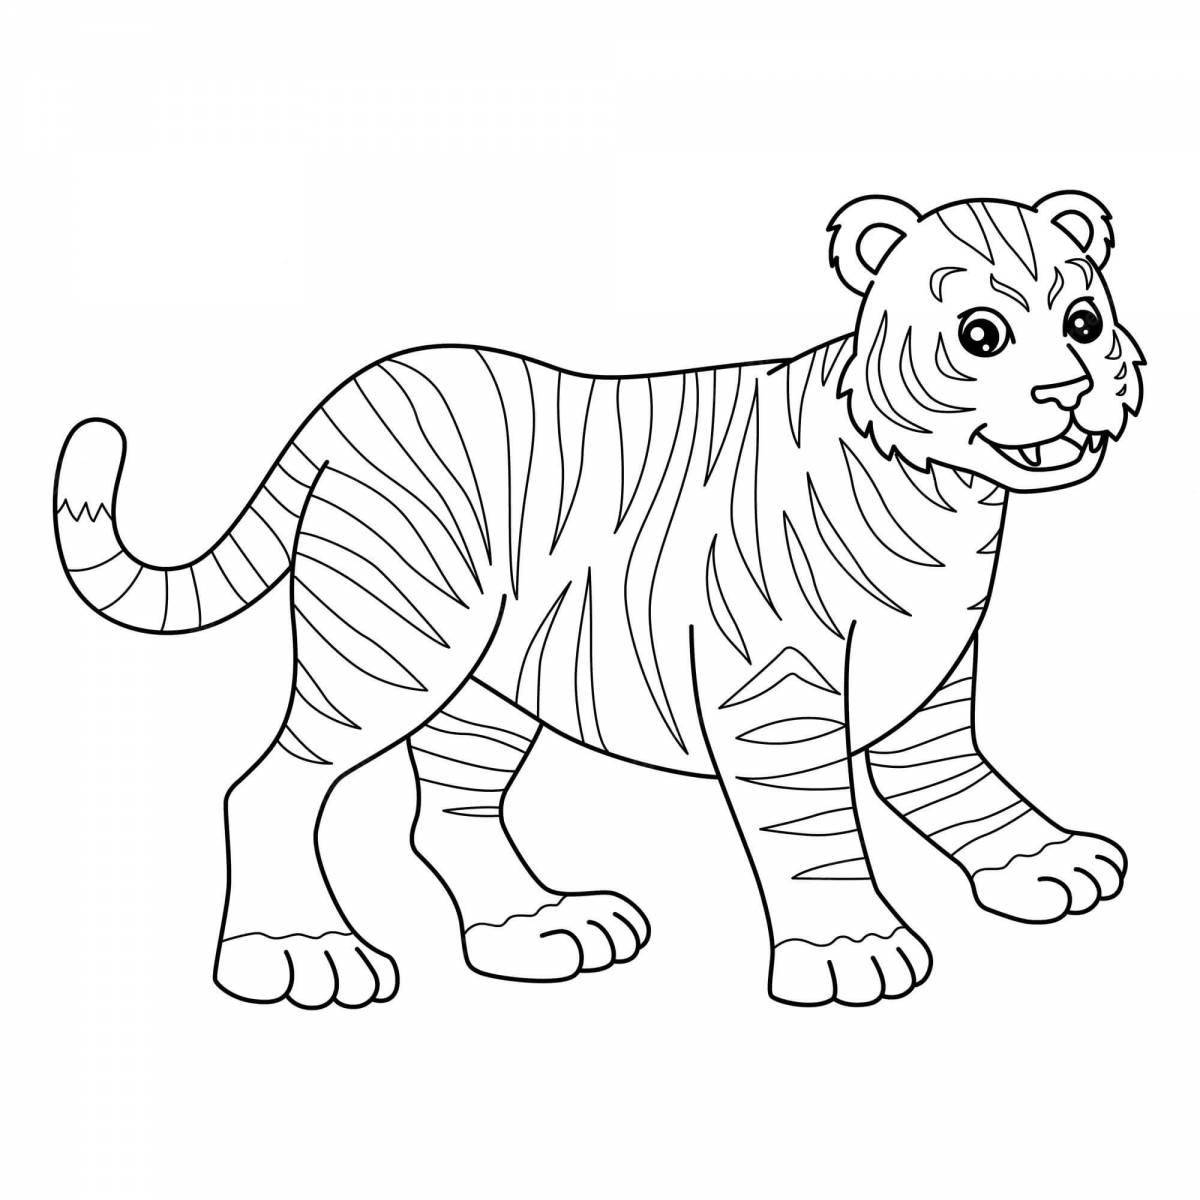 Impressive tiger coloring without stripes